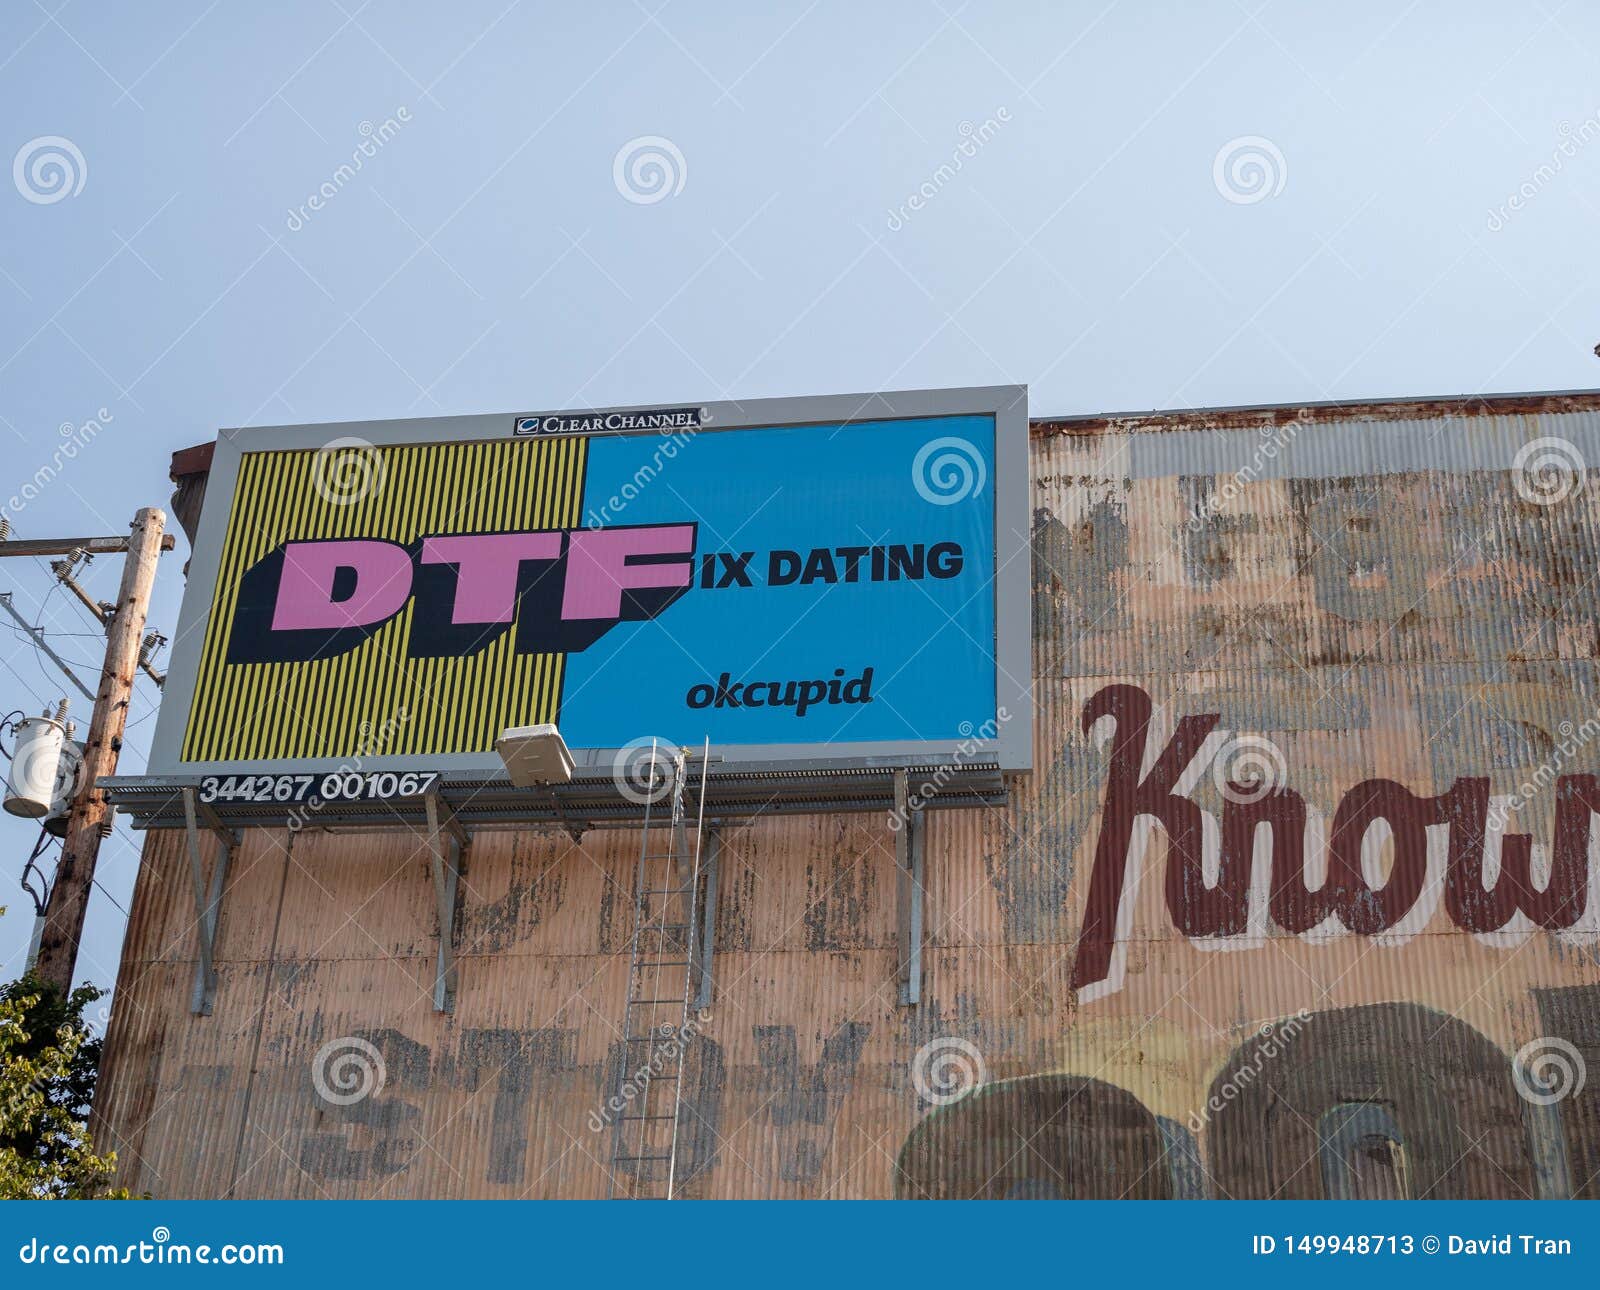 dtf dating)